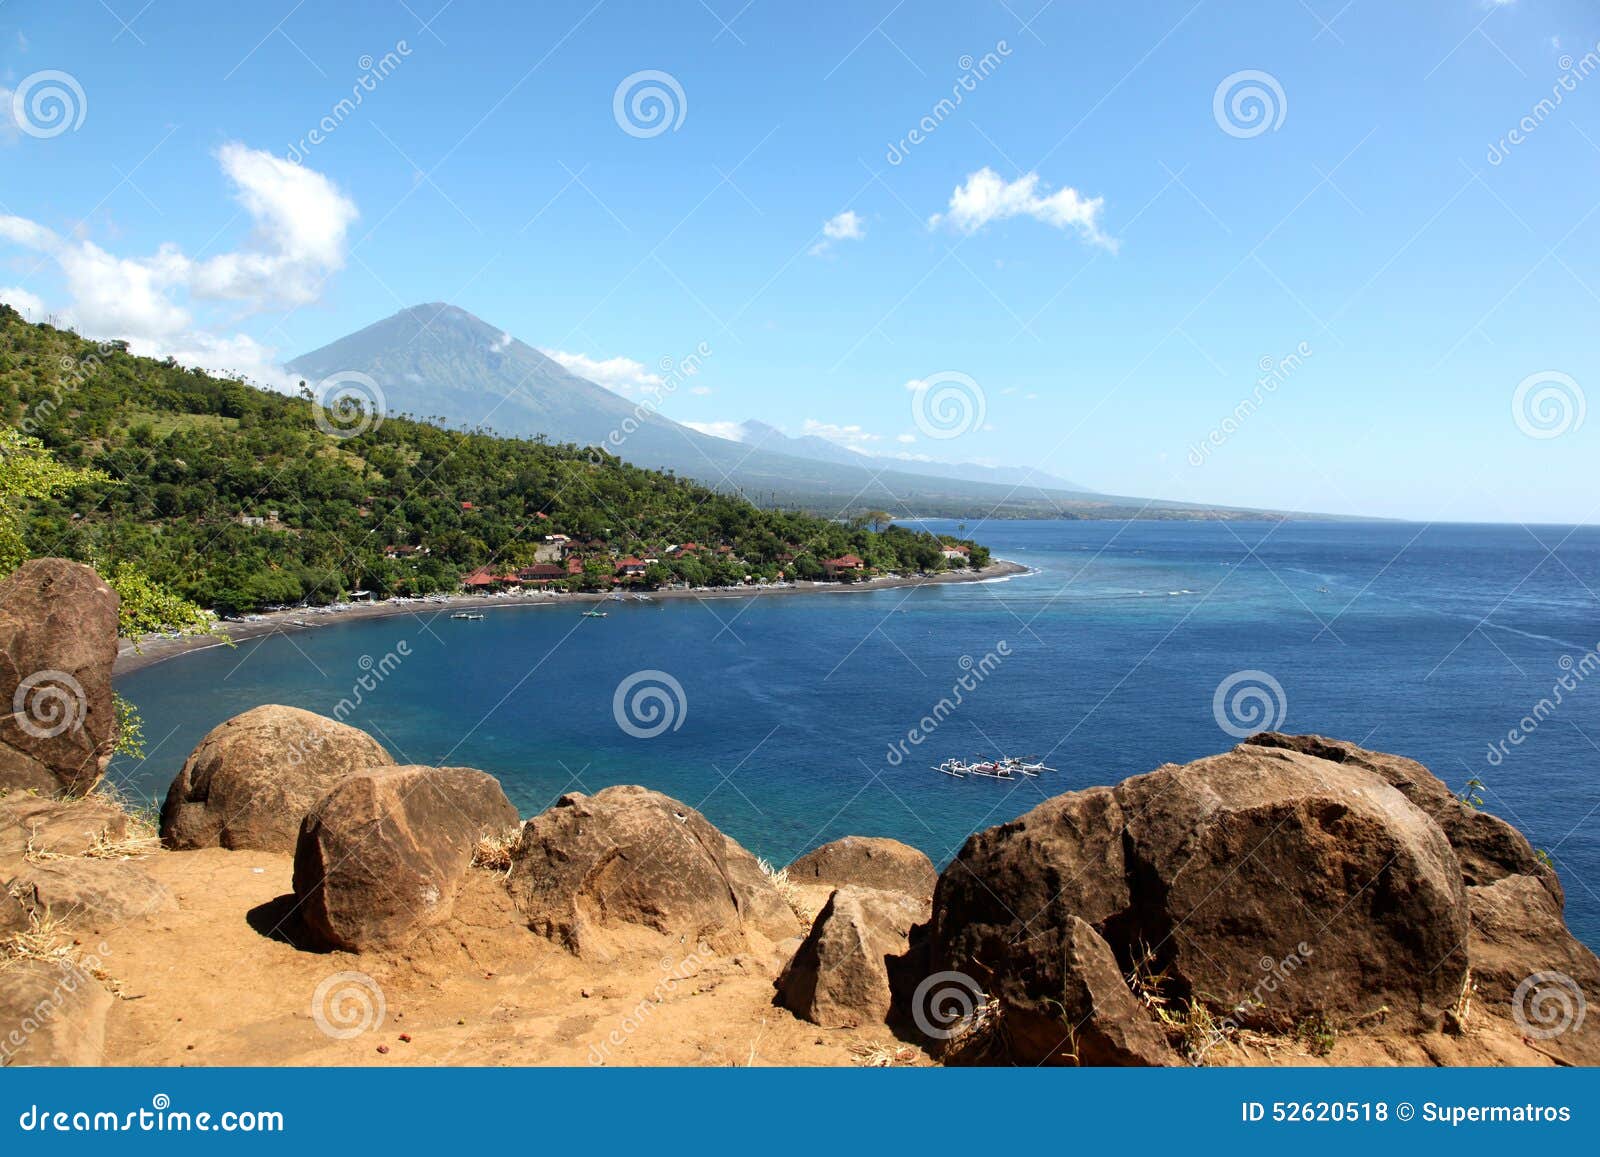 bay in the village of amed, bali